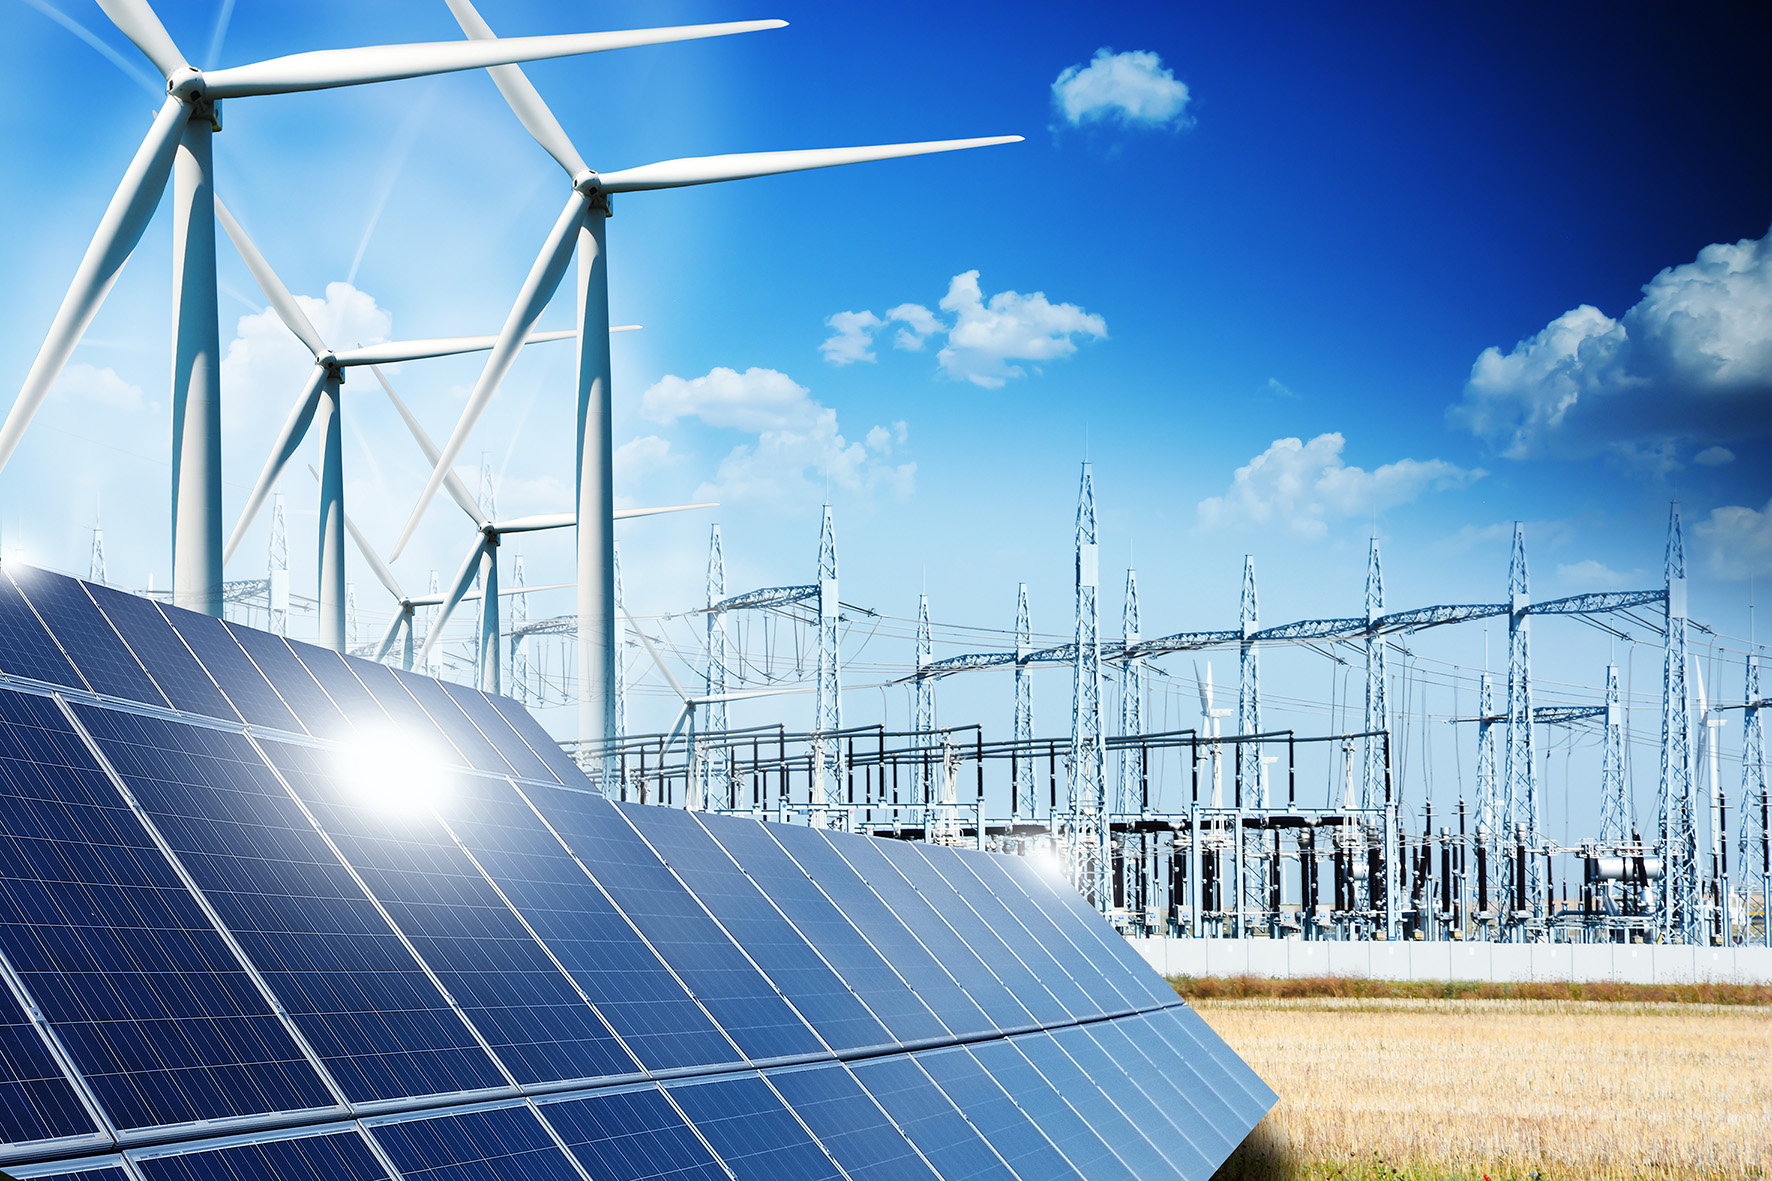 £200bn annual opportunity for energy sector to deliver energy savings